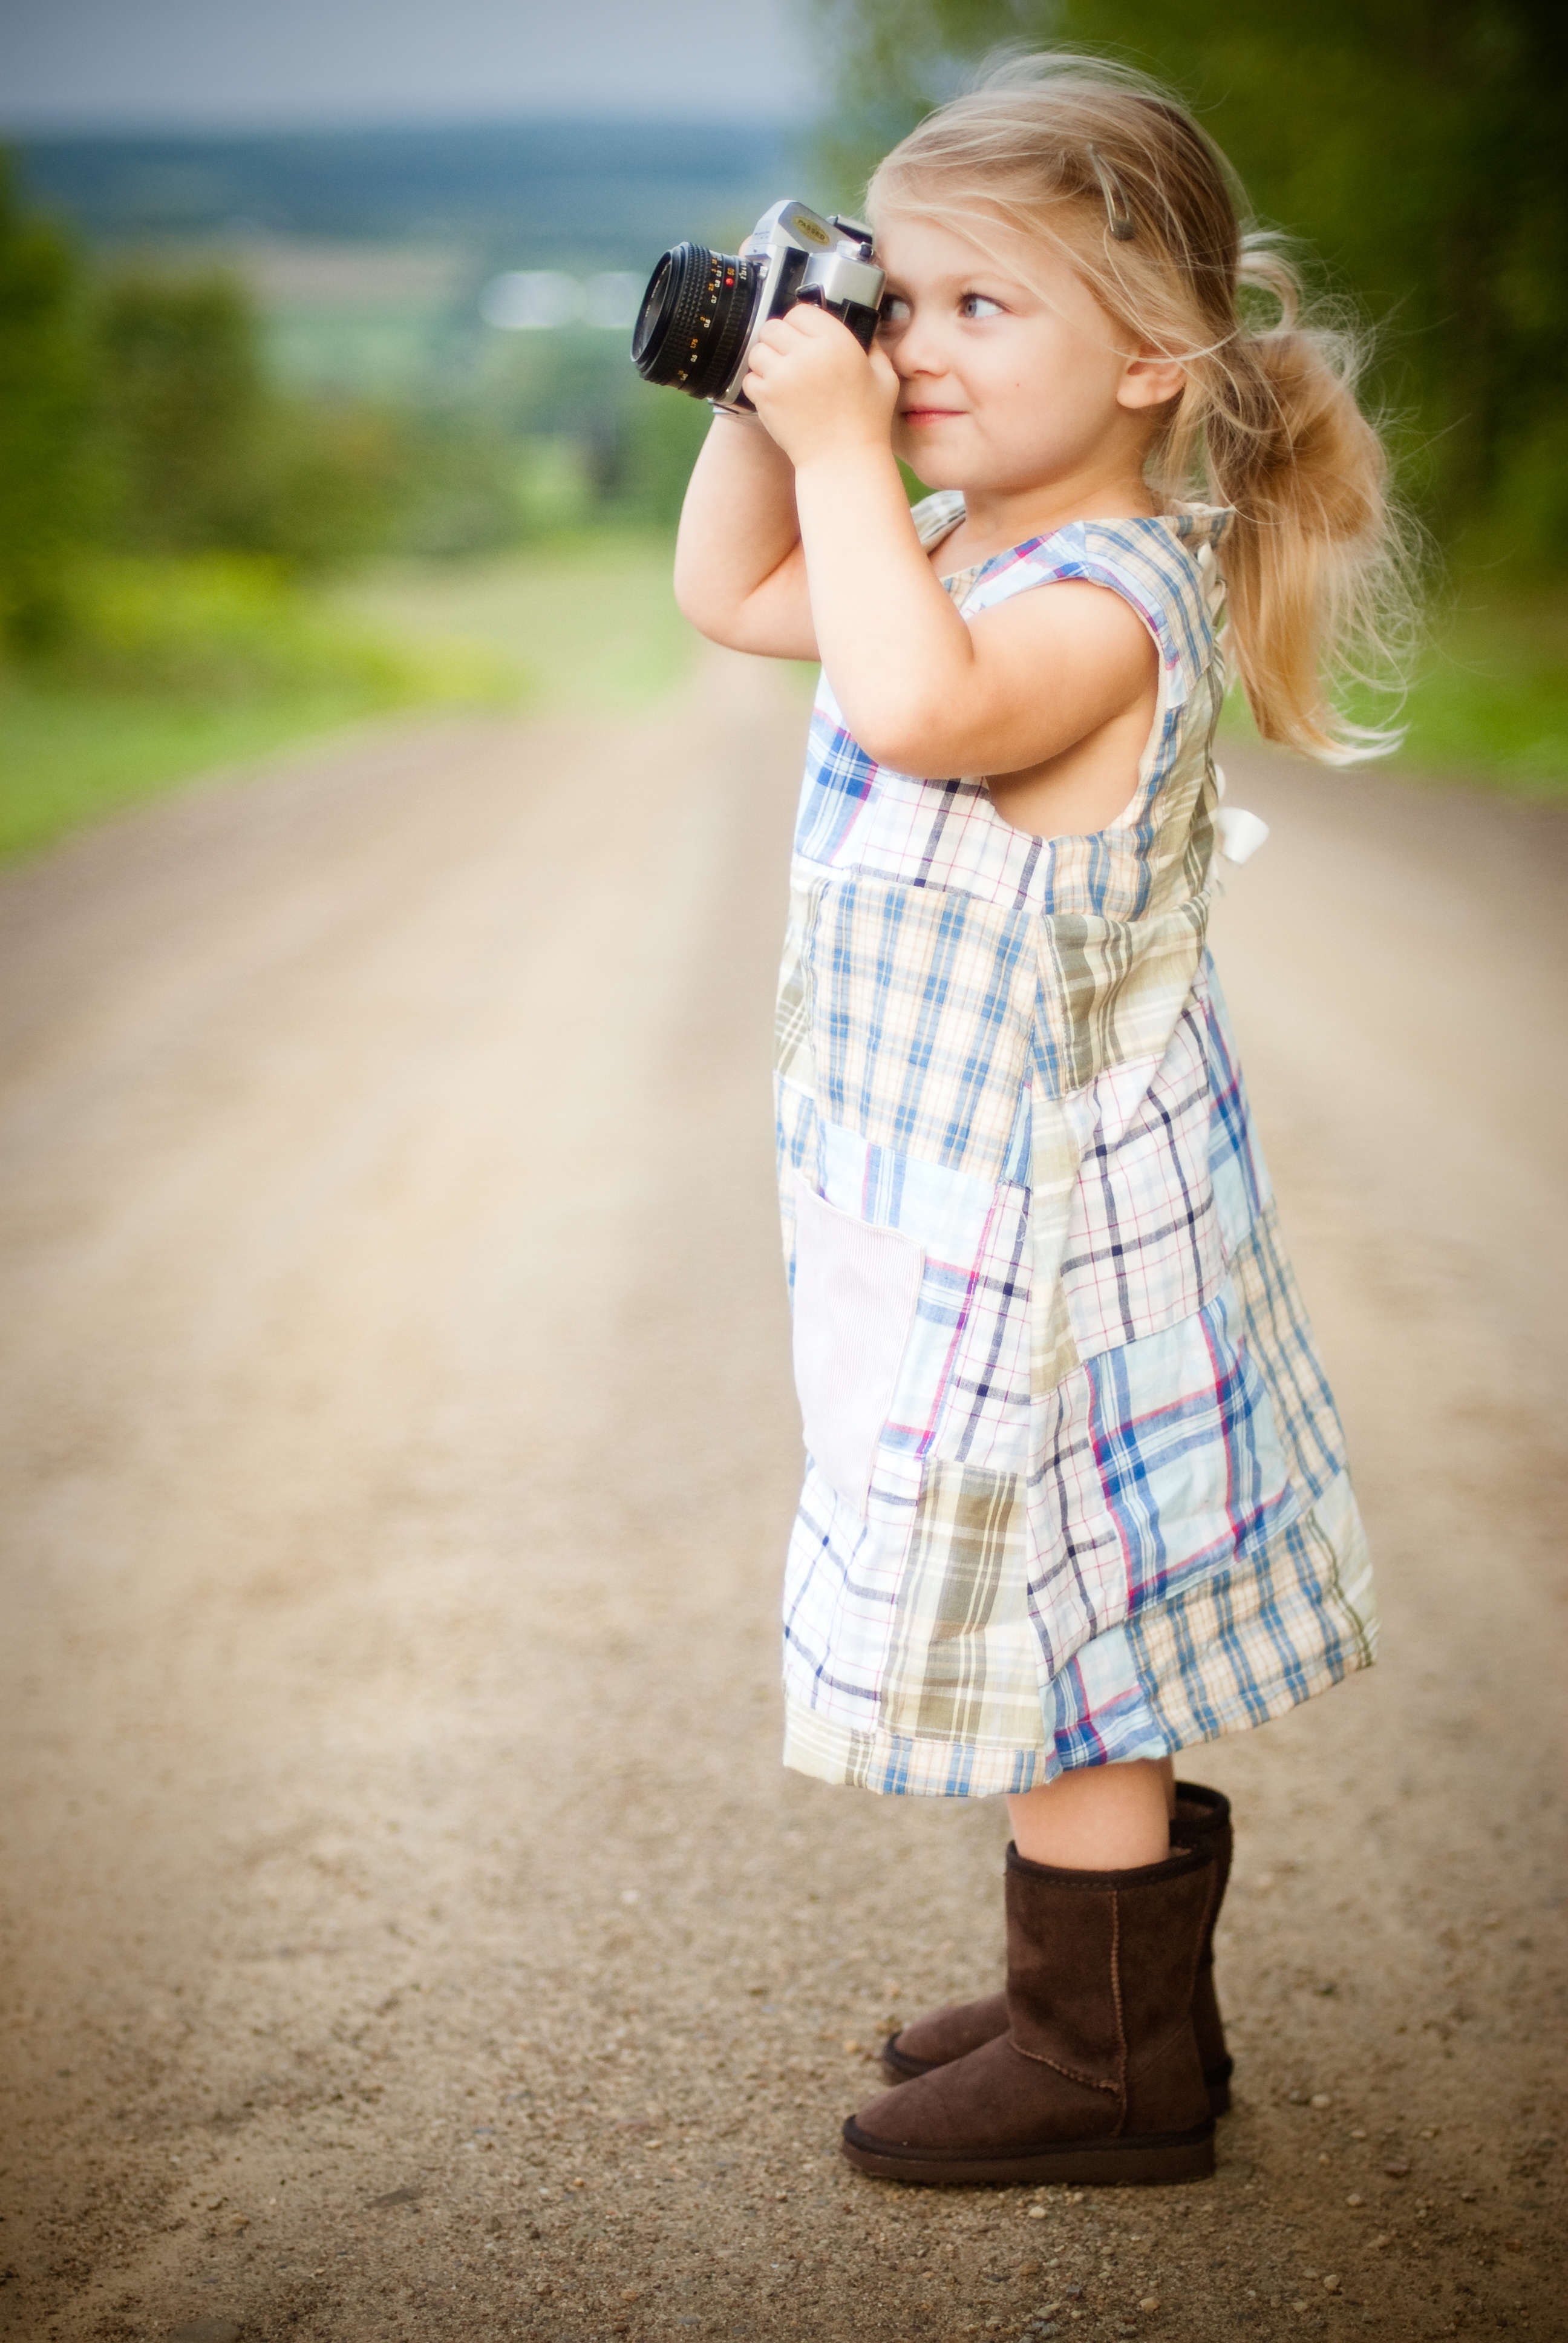 Girl With Blonde Hair and Wearing Blue and White Plaid Dress and Capturing Picture during Daytime, Girl, Wear, Summer, Photographer, HQ Photo